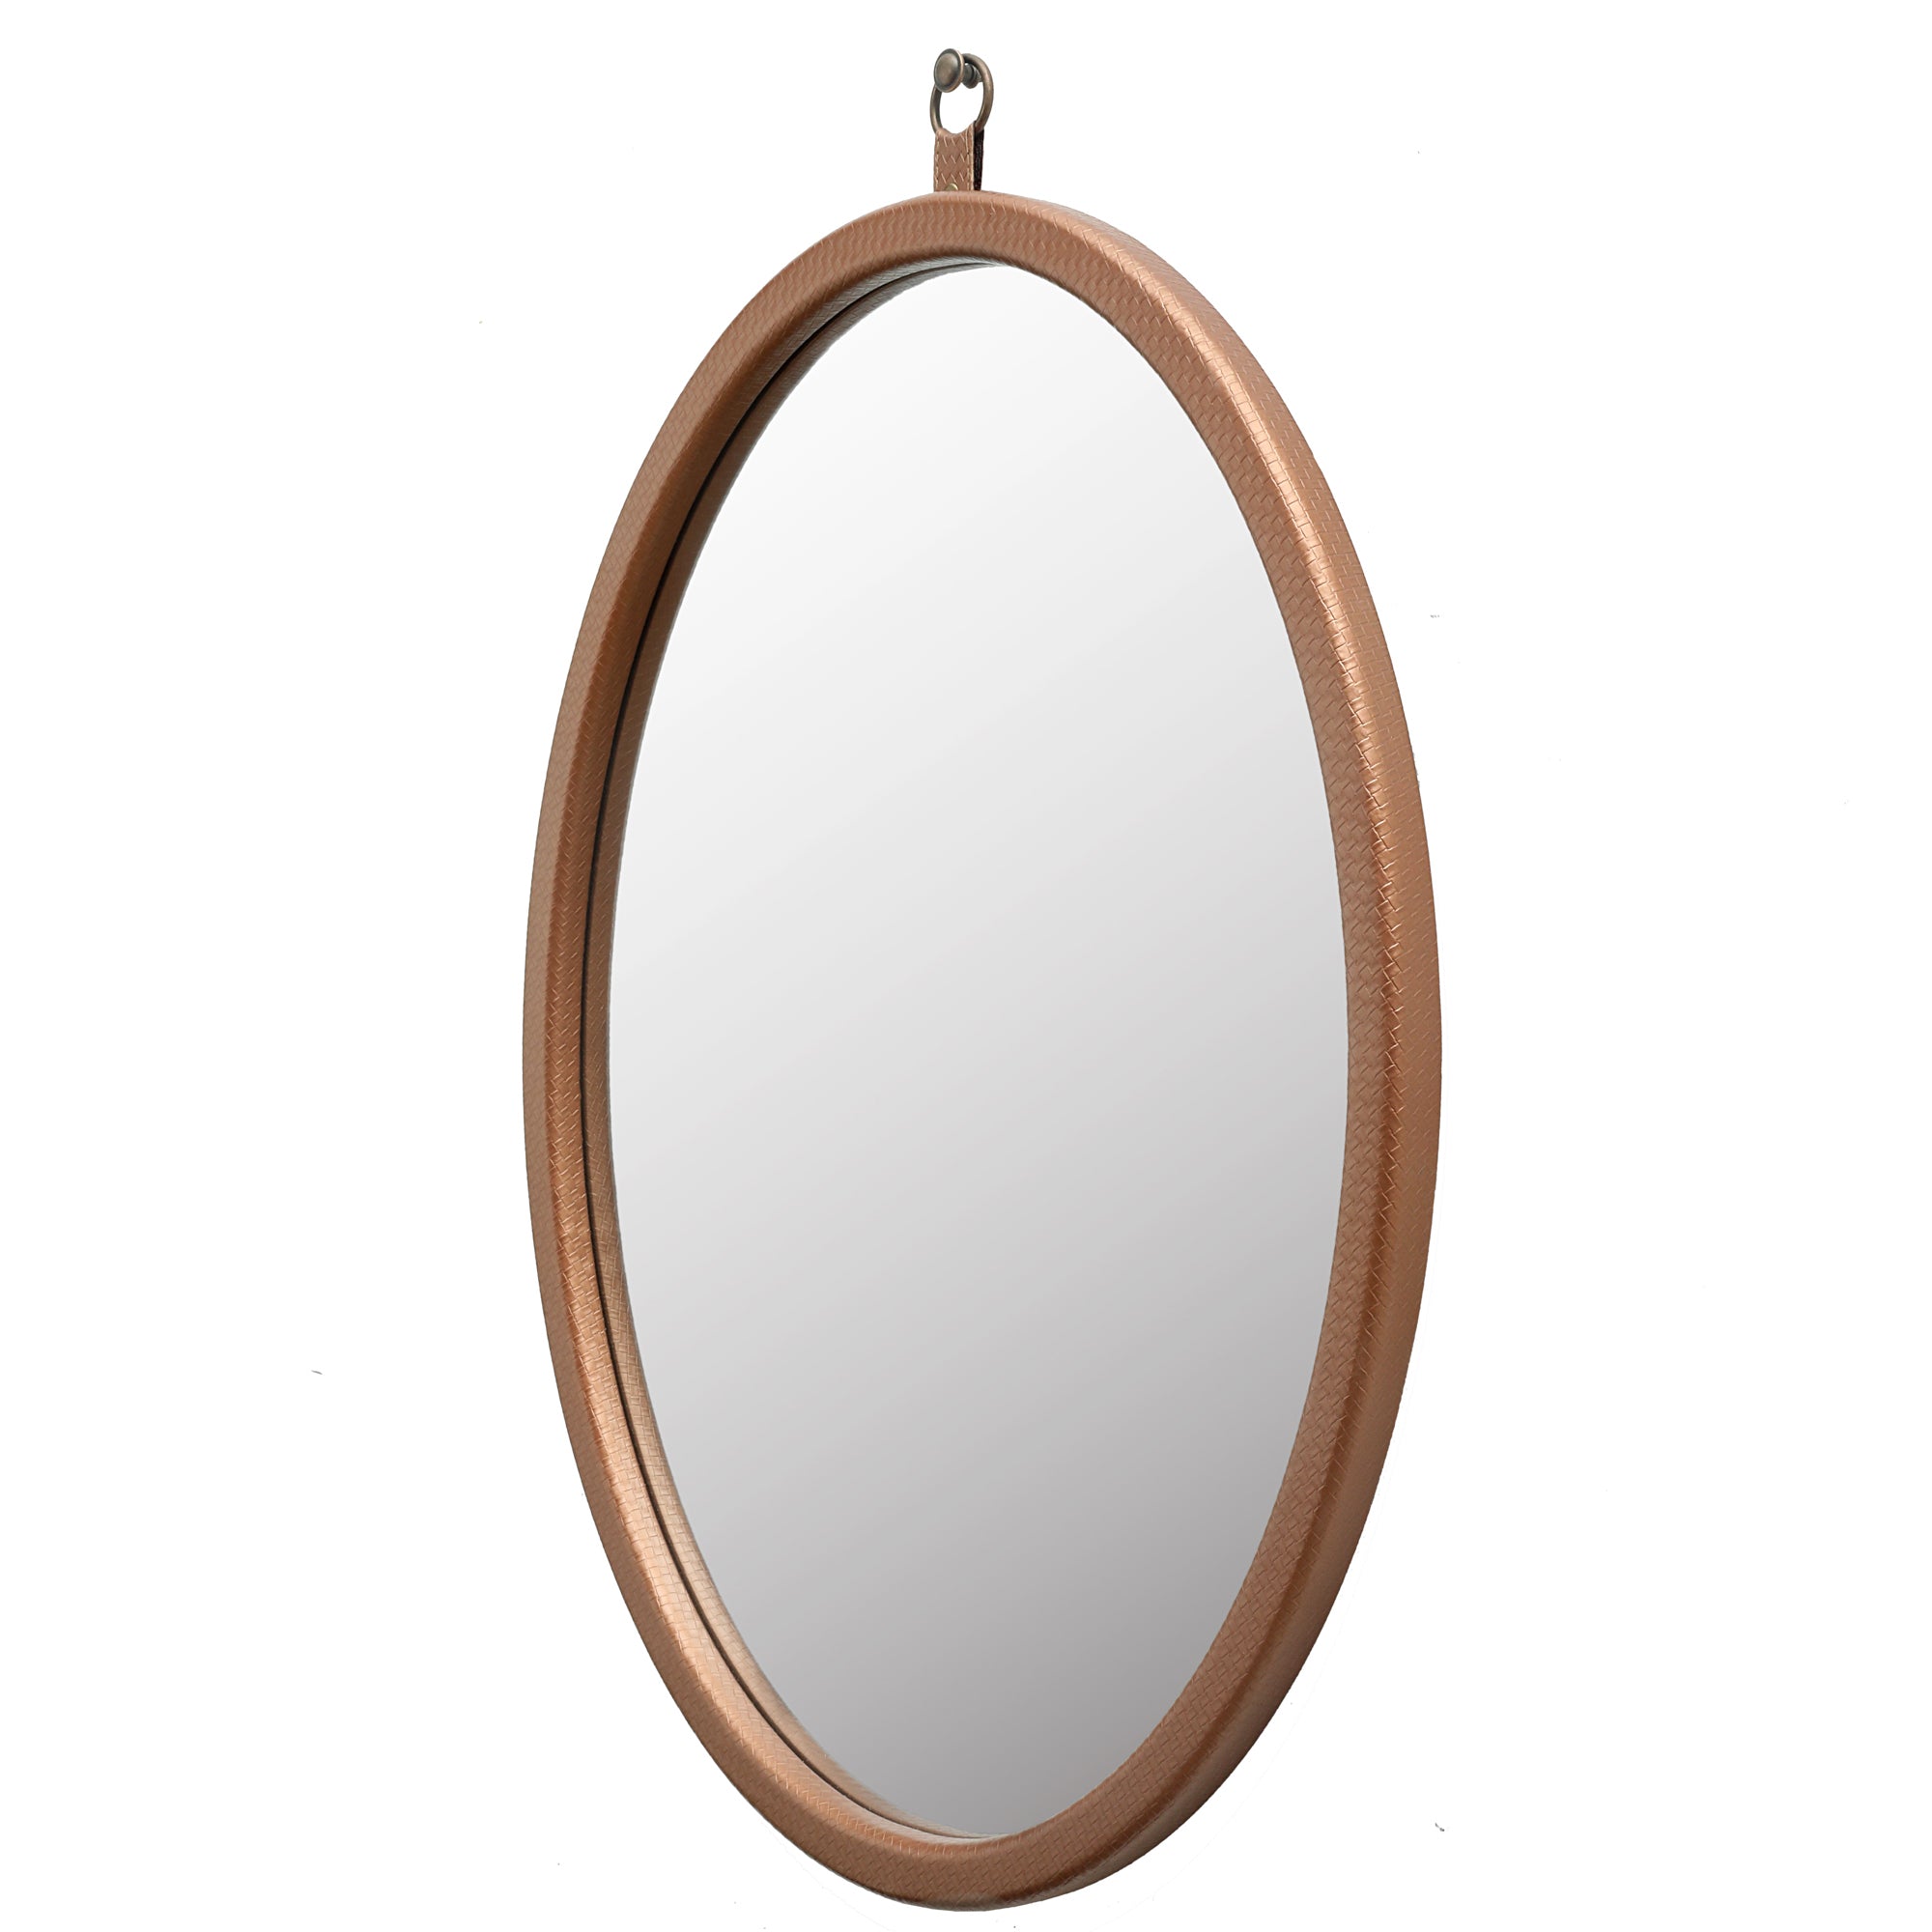 Oval Champagne Woven Grain Decorative Wall Hanging Mirror,PU Covered MDF Framed Mirror for Bedroom Living Room Vanity Entryway Wall Decor,23.62x29.92inch